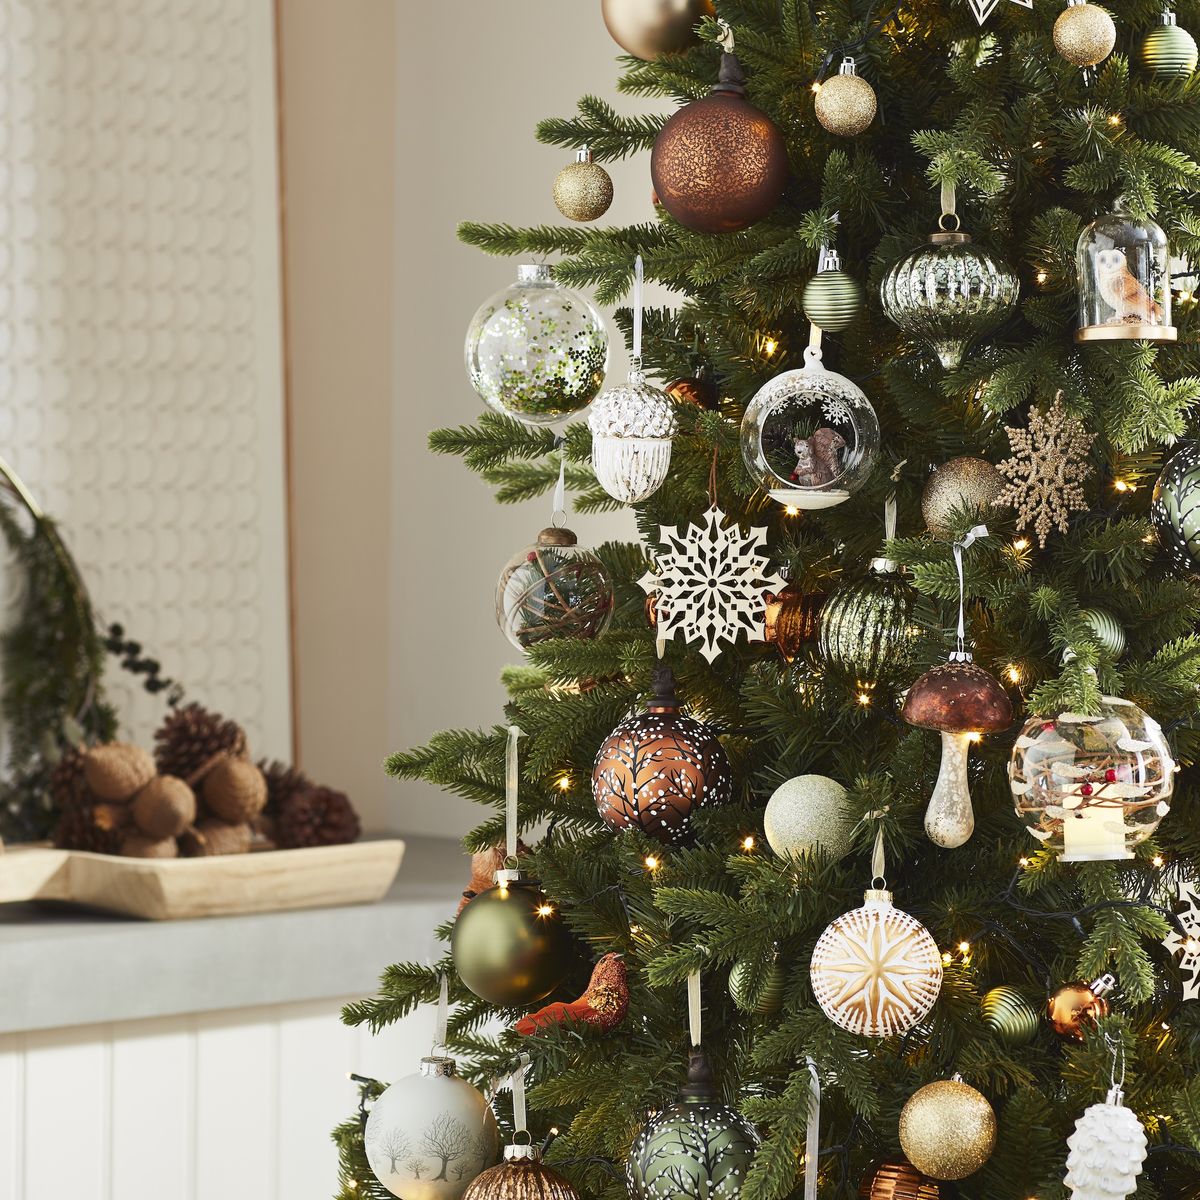 How To Decorate a Neutral Christmas Tree That Still Looks Glam 